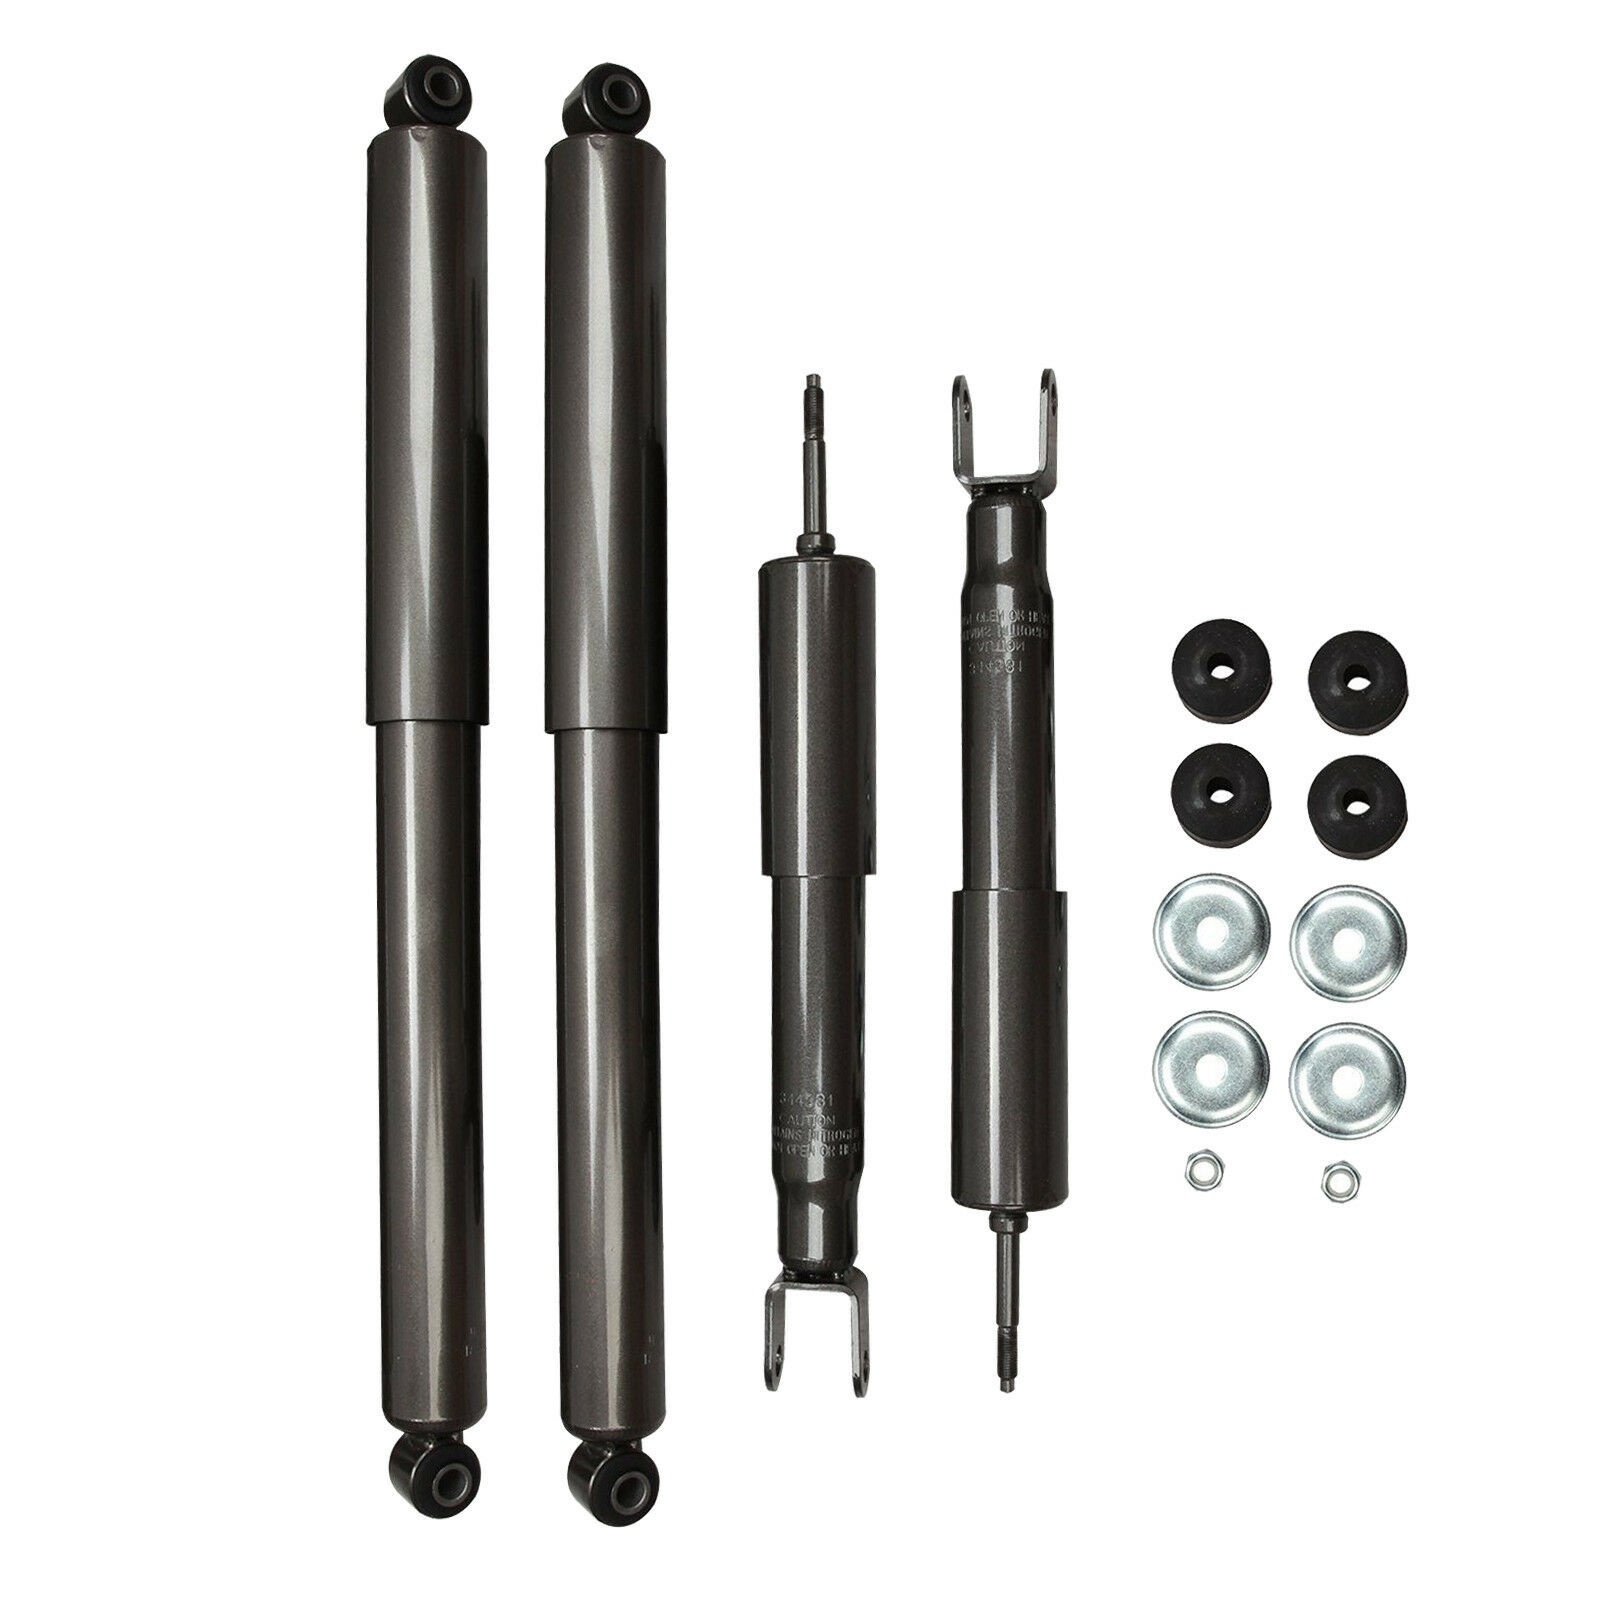 Set of (4) Front and Rear Shock Absorbers fits Chevy Silverado GMC Sierra 1500